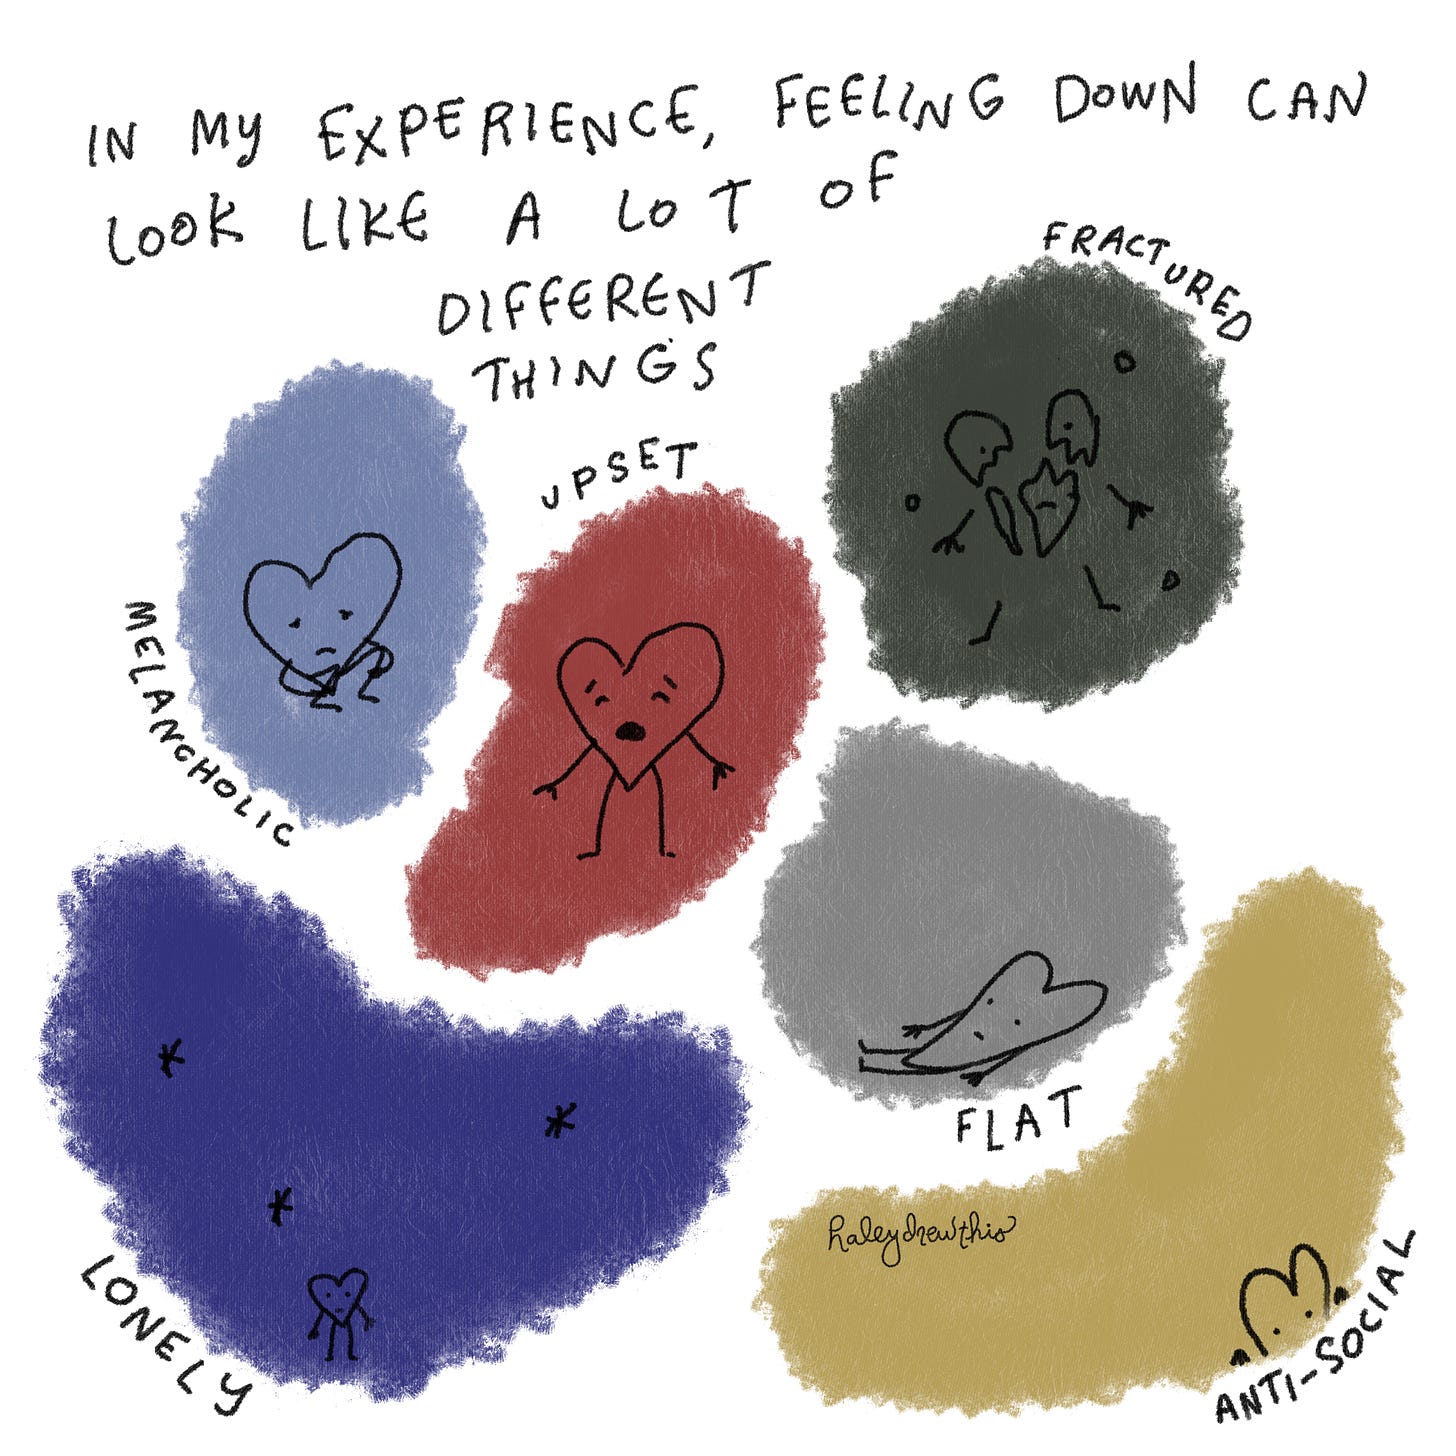 in my experience, feeling down can feel like a lot of different things